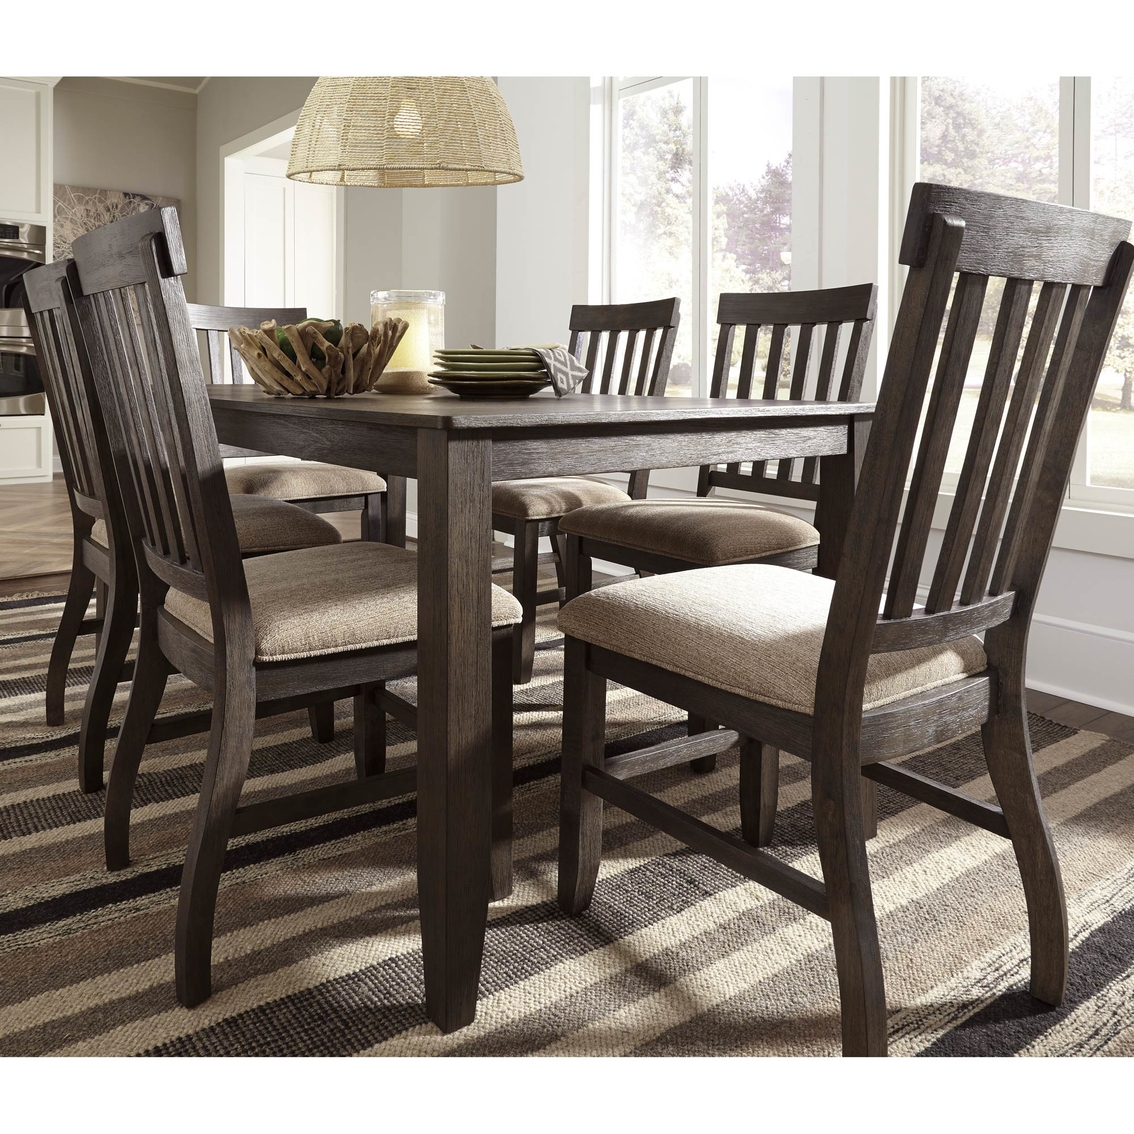 Signature Design by Ashley Dresbar Table with 6 Side Chairs - Image 4 of 4